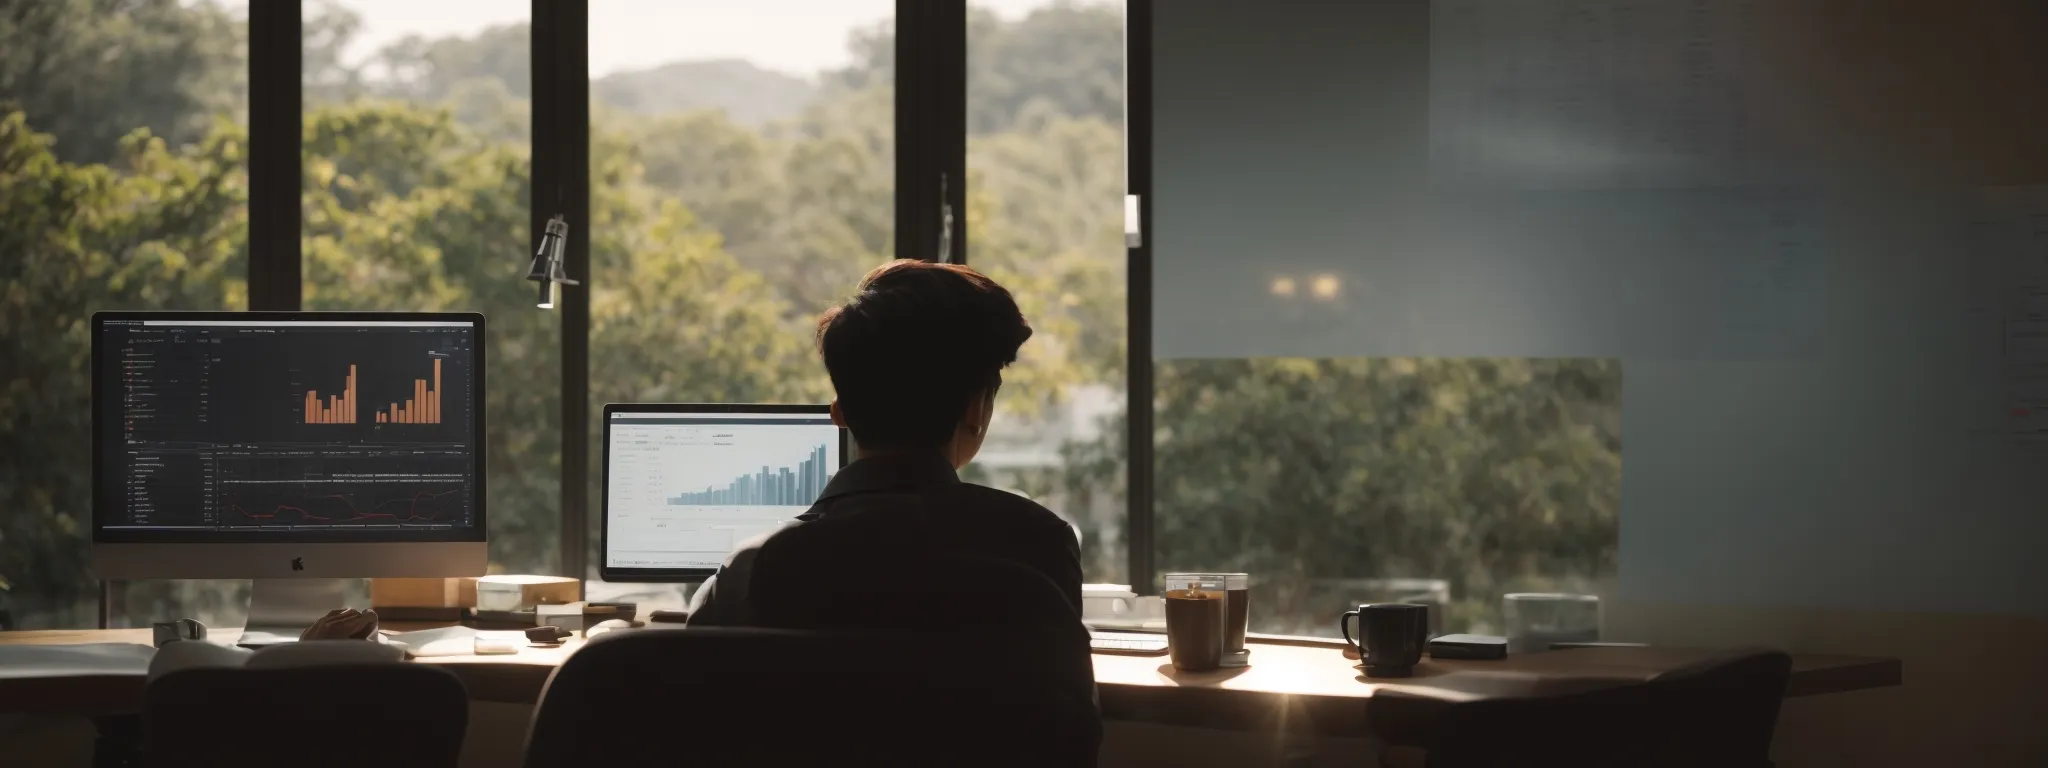 a person sits with a laptop at a minimalistic desk, immersed in analyzing data on a website analytics dashboard as the morning sunlight streaks in.